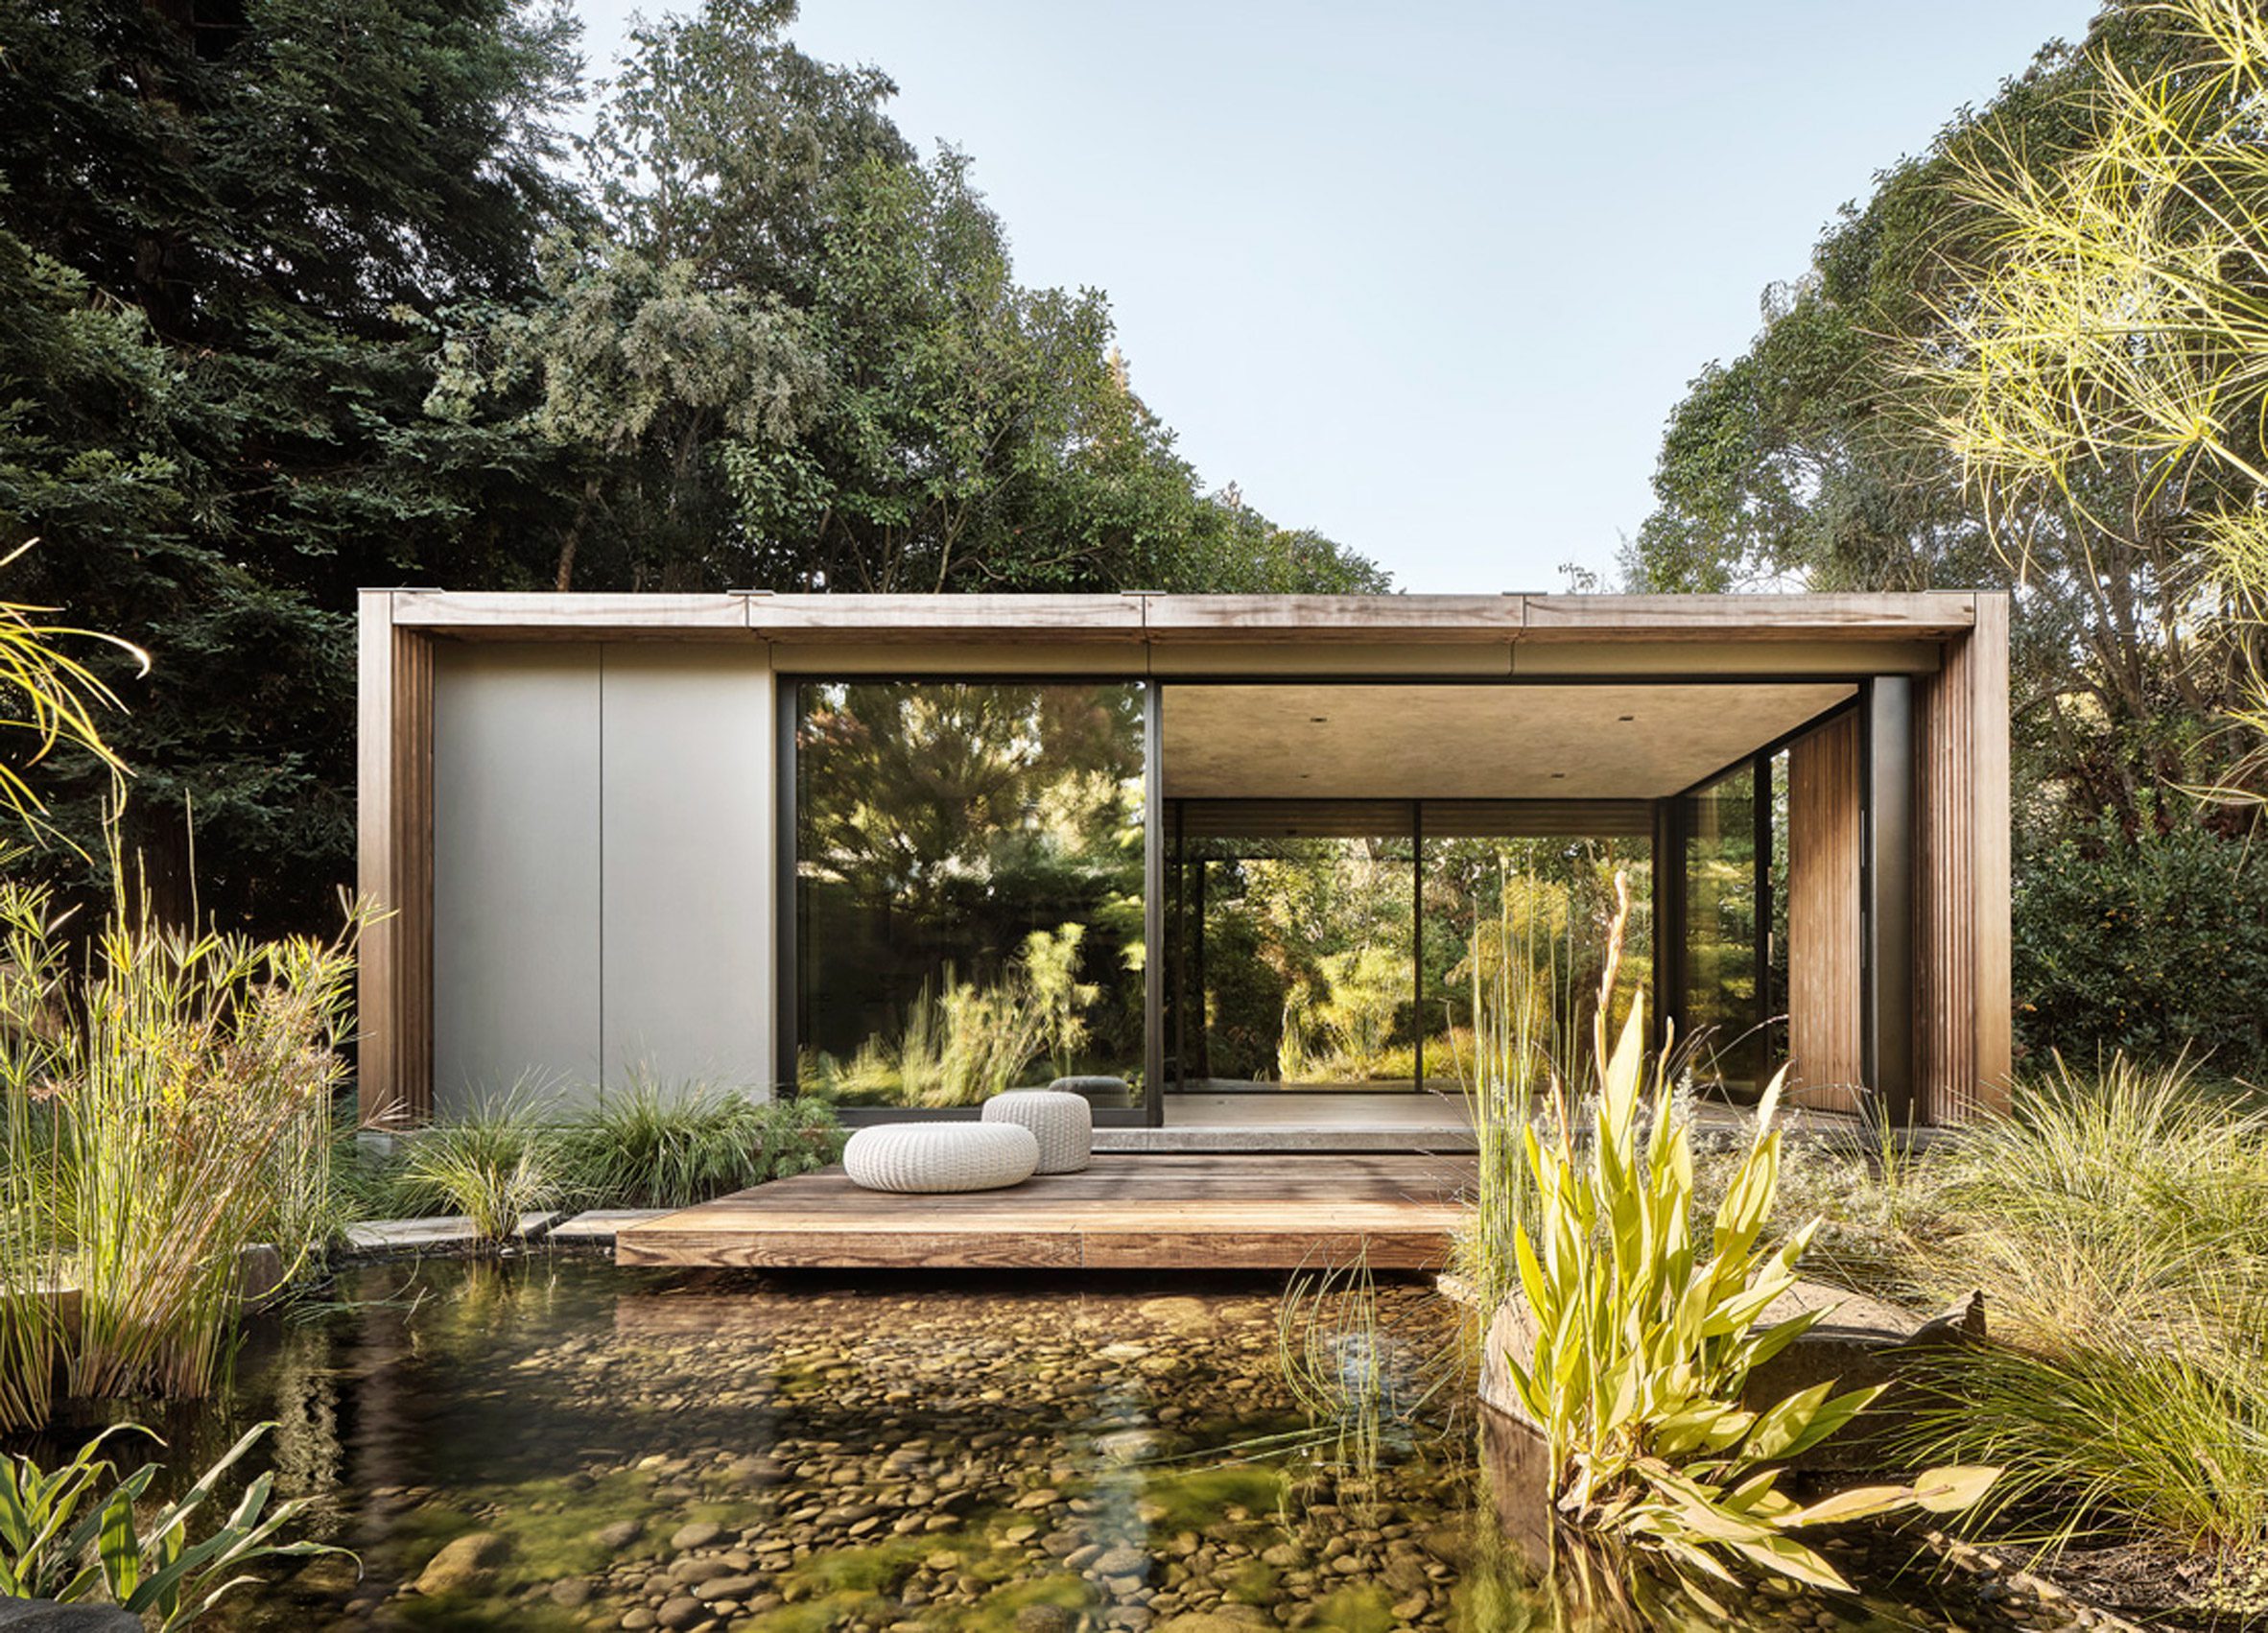 A pavilion by Feldman Architecture surrounded by greenery